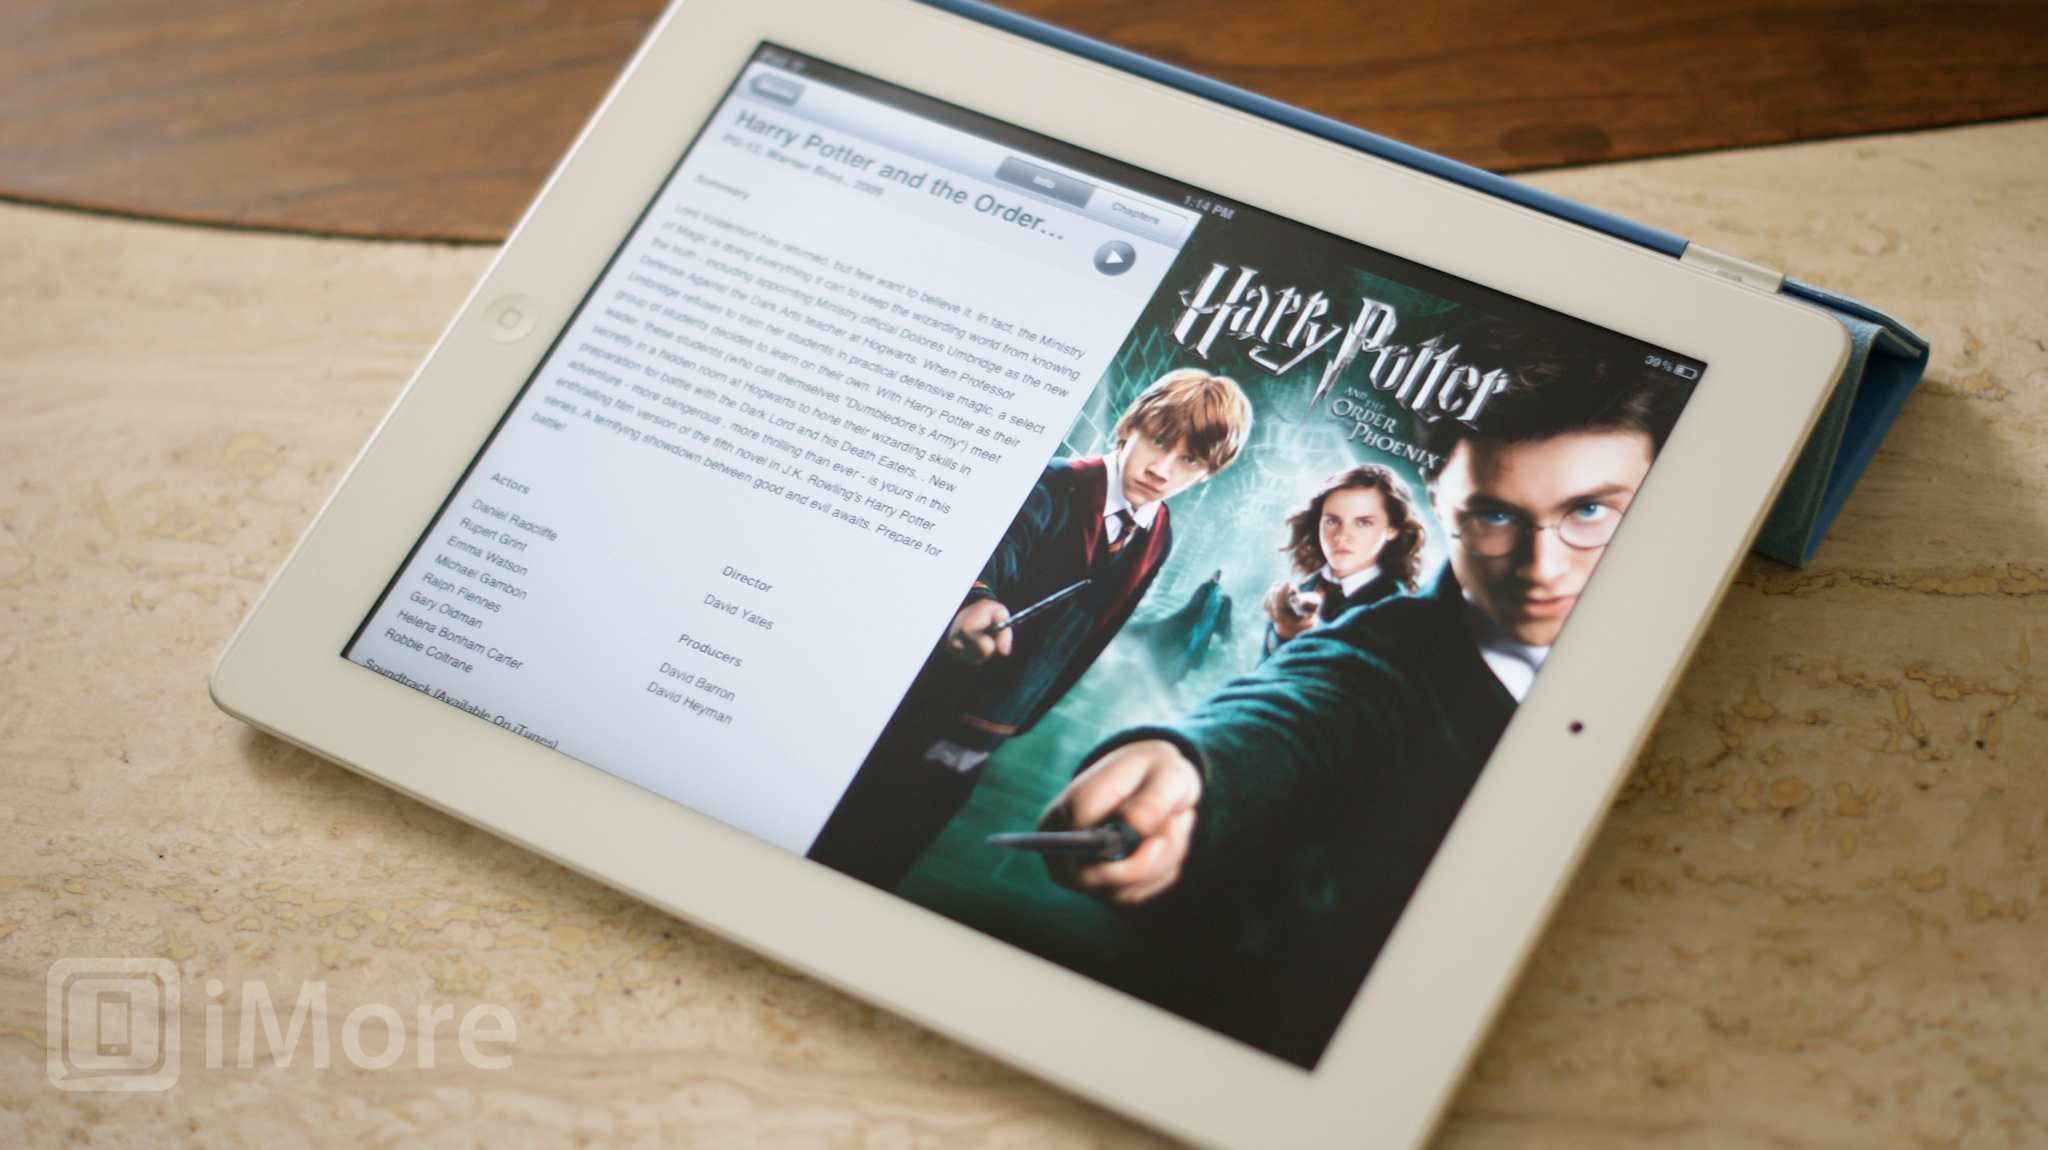 How to download movies and music on your new iPad